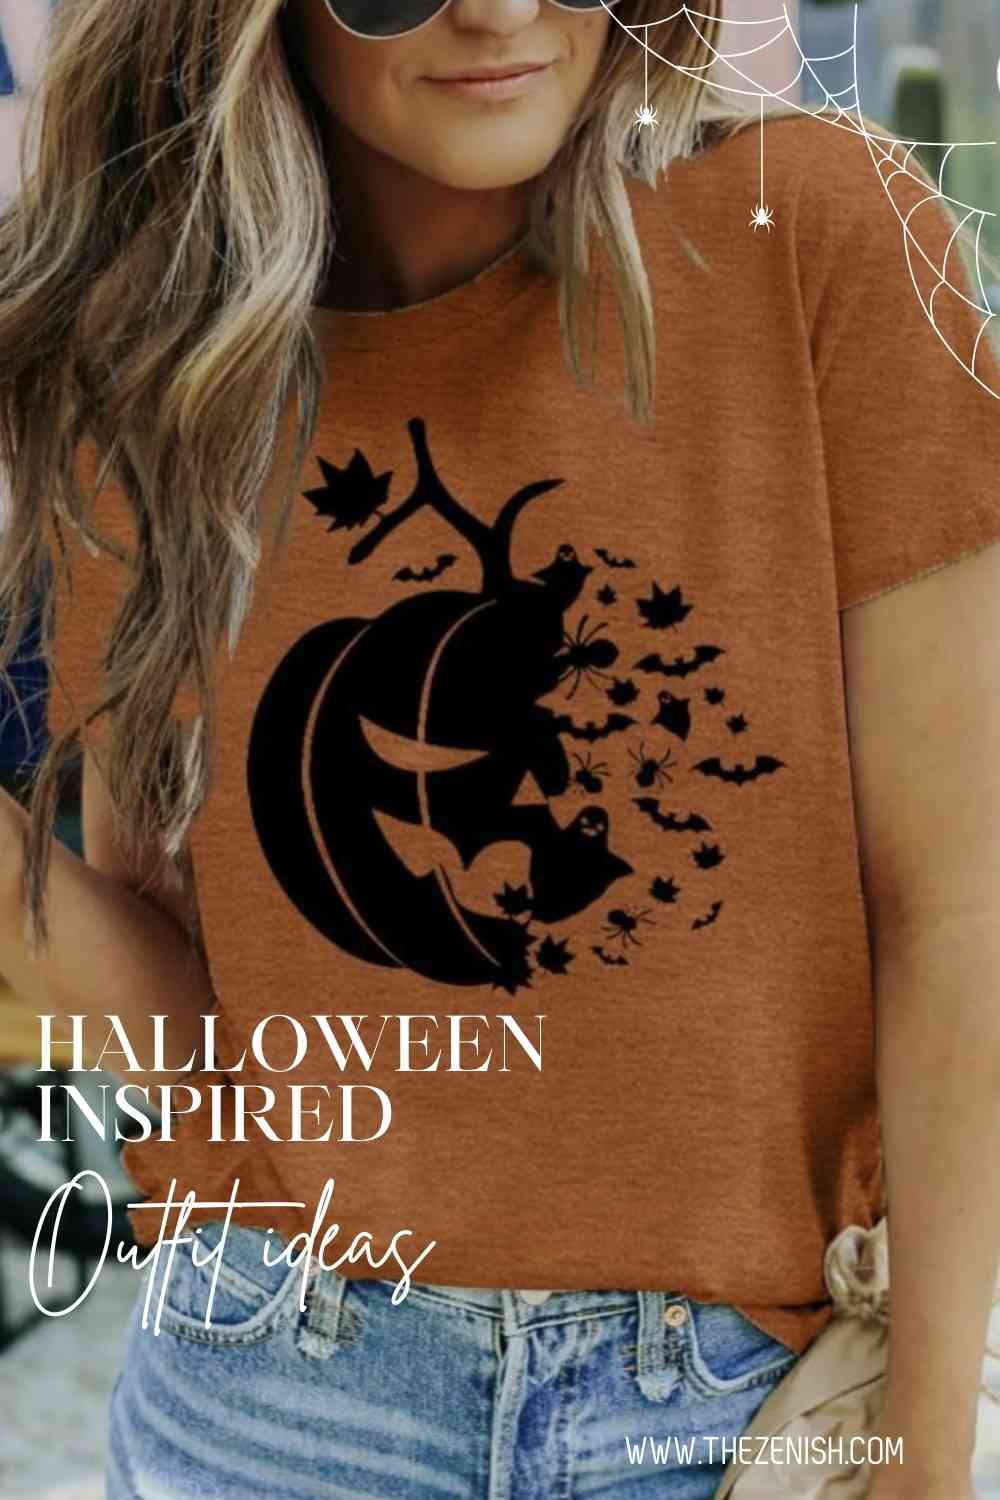 13 Spooktacular Halloween Inspired Outfit Ideas 14 13 Spooktacular Halloween Inspired Outfit Ideas